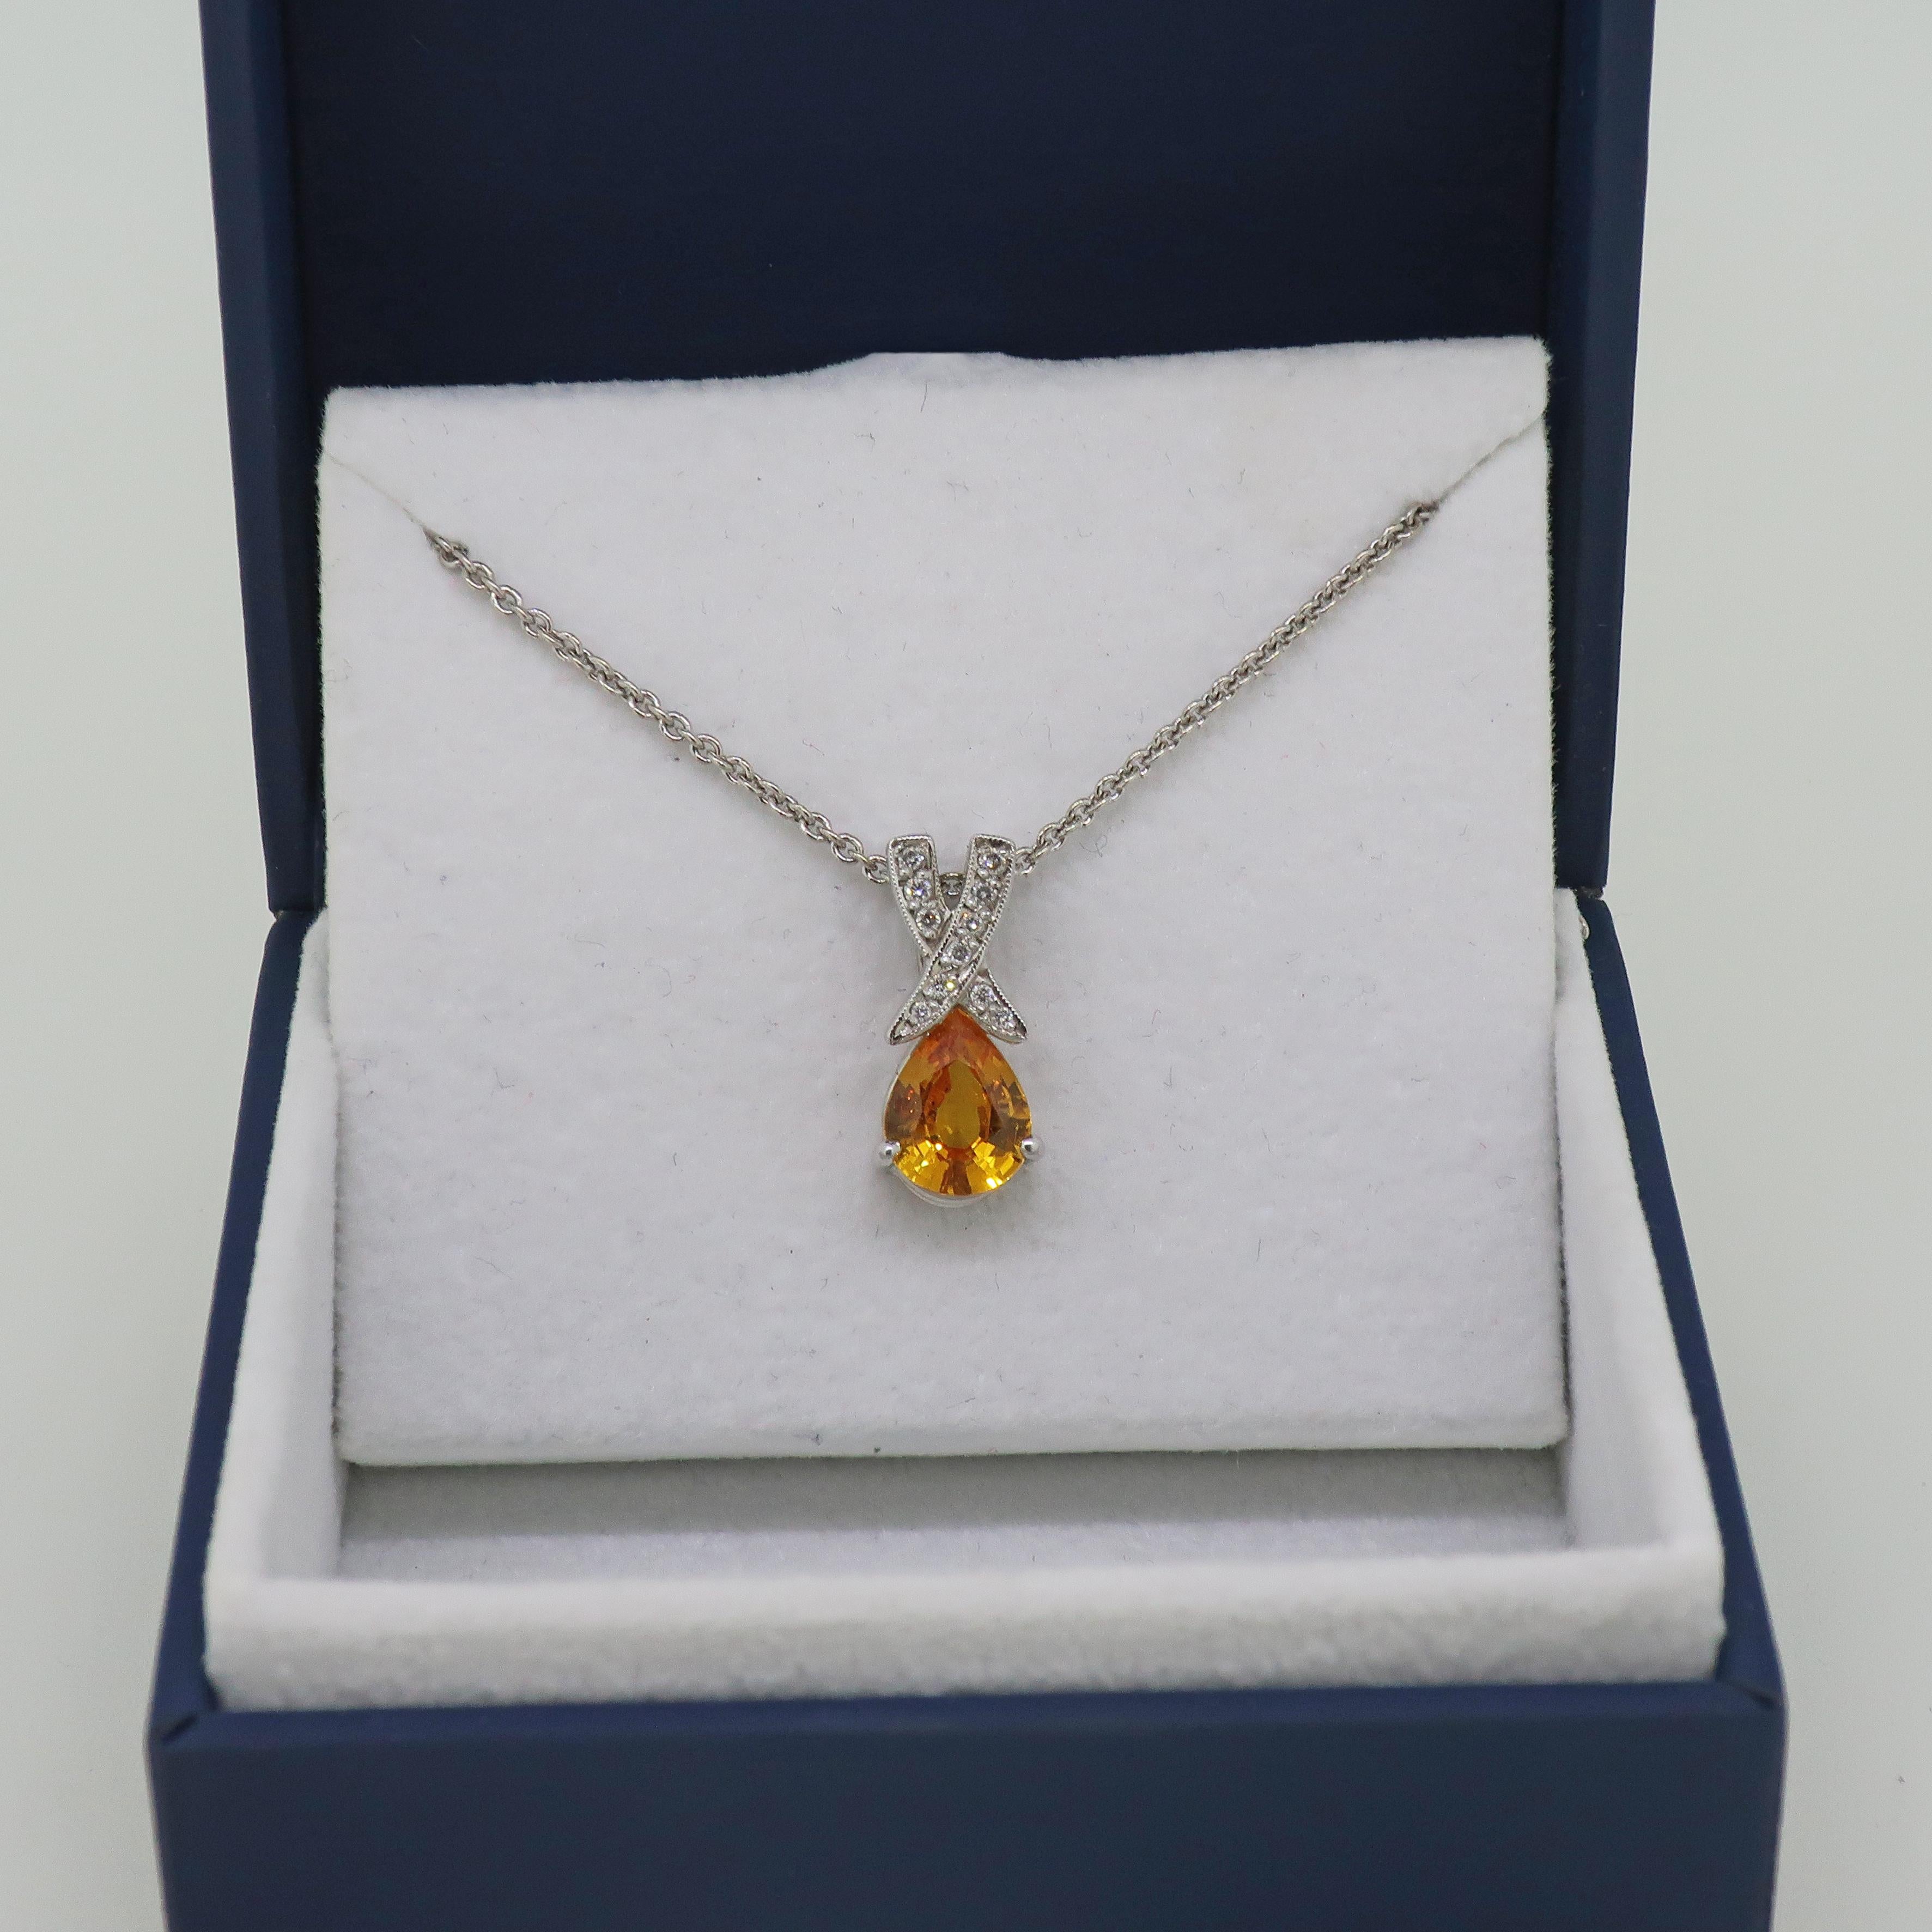 Yellow Sapphire and Diamond Pendant 18 Karat White Gold 

Gorgeous yellow sapphire and diamond pendant. Bright and vibrant pear shape yellow sapphire measuring 9mm x 7mm, with a diamond top. Two bands of brilliant cut diamonds crossing over each